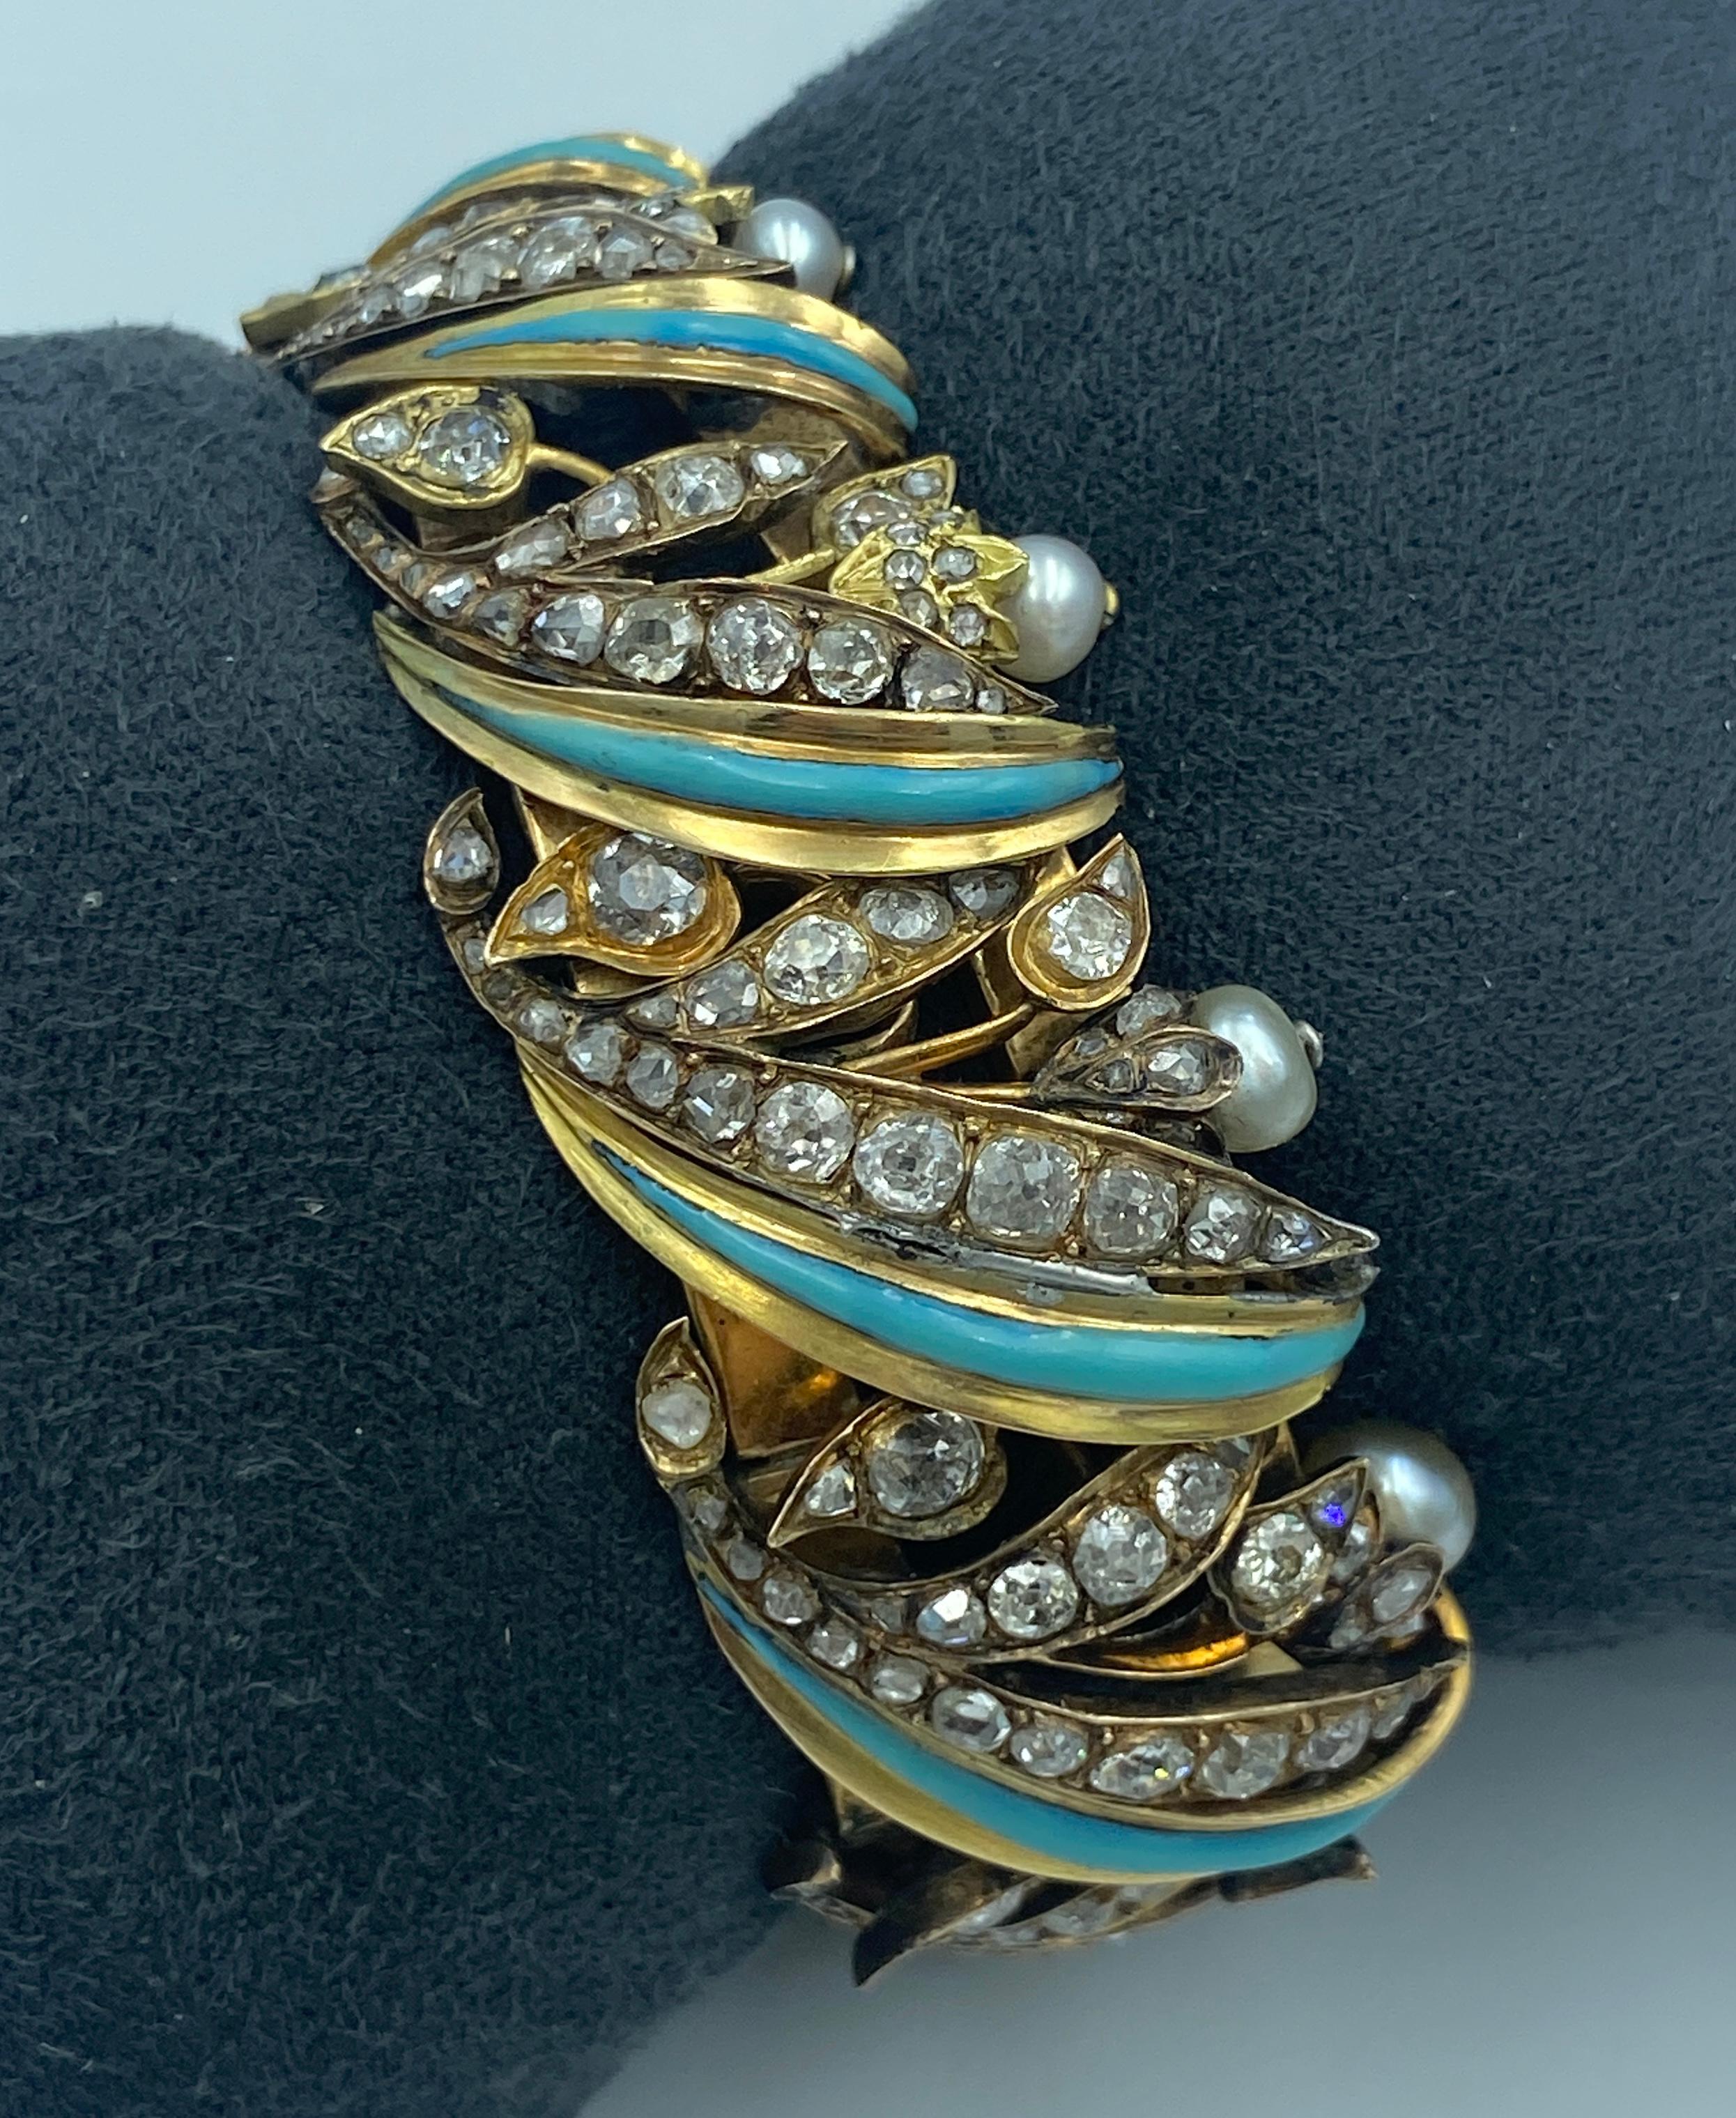 Neoclassical 1820 European 18k gold, turquoise, old mine cut diamond & natural pearl bracelet For Sale